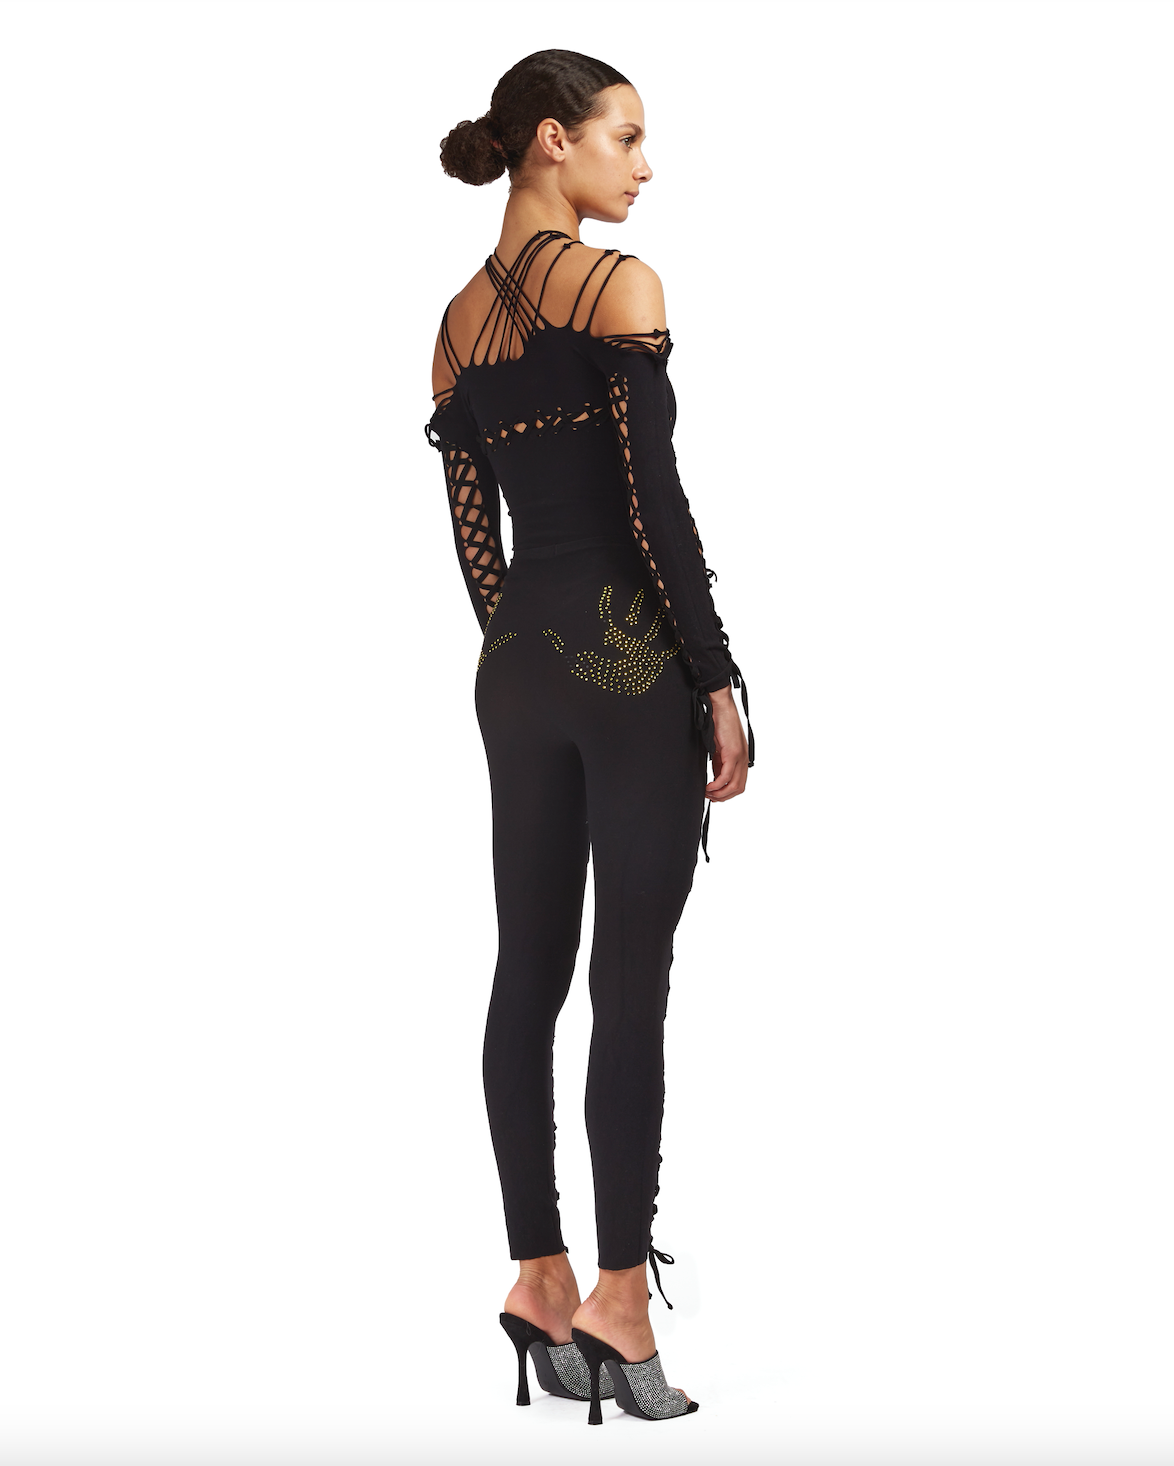 Seamless leggings with lace up detailing and rhinestone hand-prints